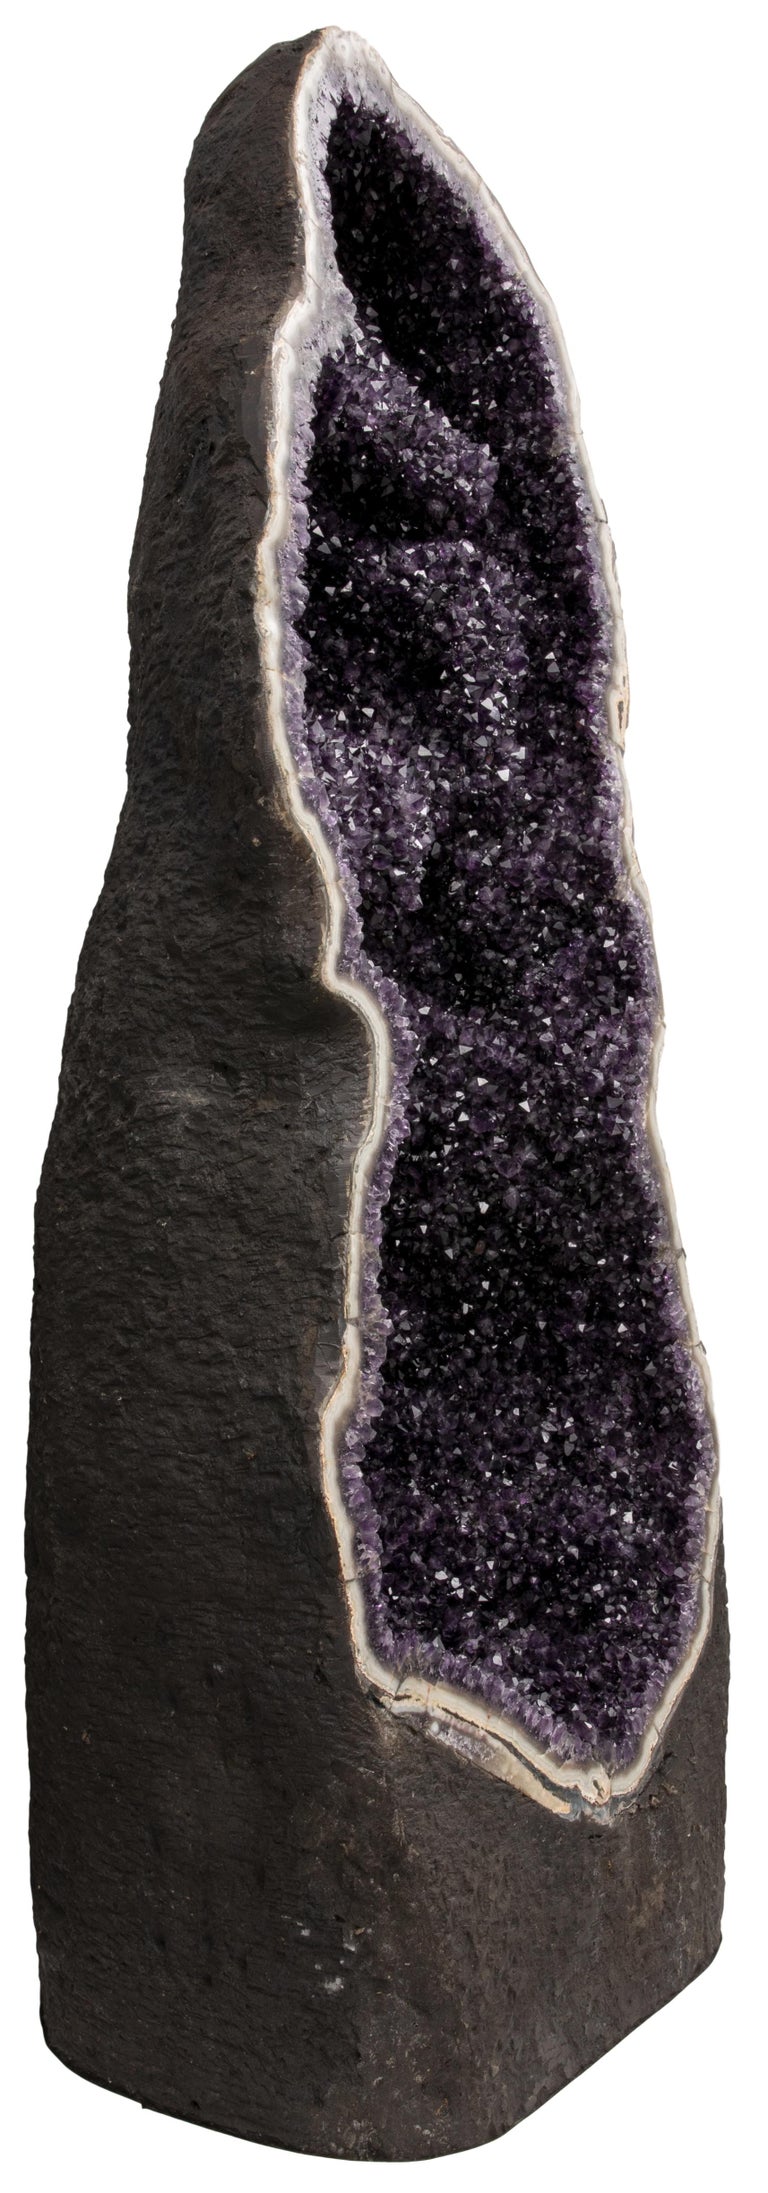 Incredible Deep Purple Amethyst Tower - Complete Half Geode with Agate border In Good Condition For Sale In London, GB